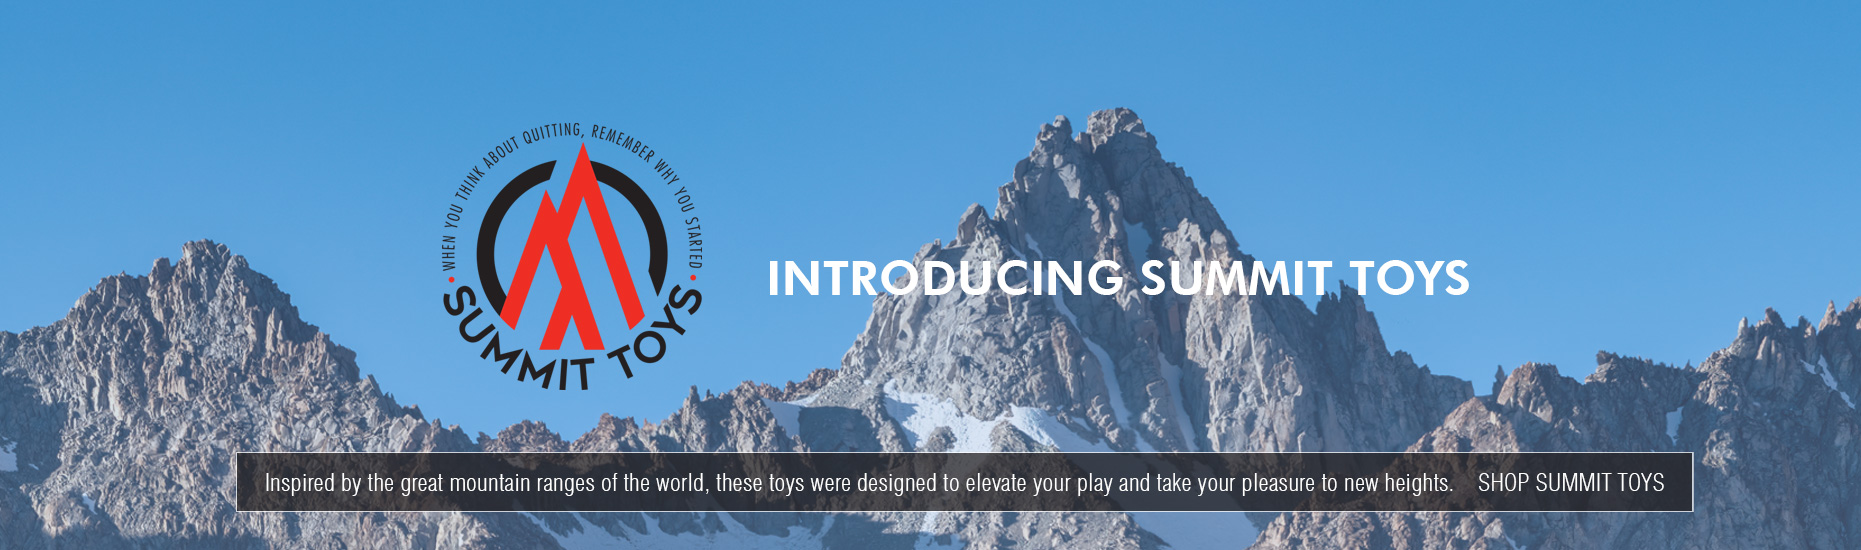 Introducing Summit Toys